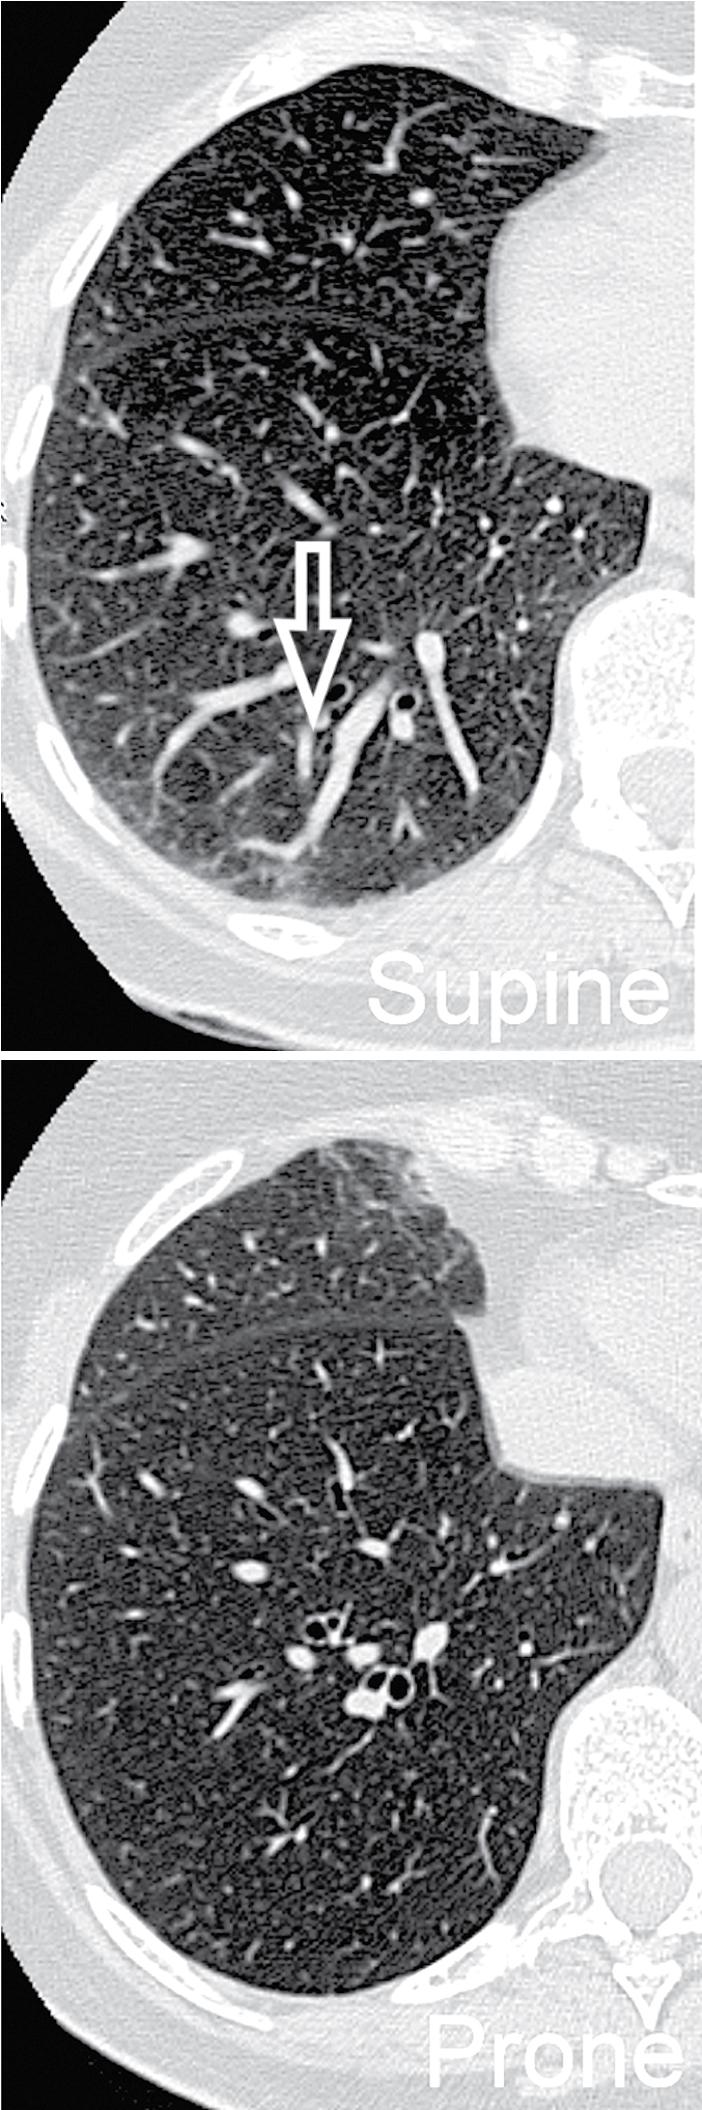 Figure 4.13, Supine (top) and prone (bottom) axial views of the right lung approximately at the same level. In the supine scan, there is an area of faint increased attenuation in the subpleural region (arrow) . The opacity disappears in the prone position, so it should be functional and not due to lung pathology.